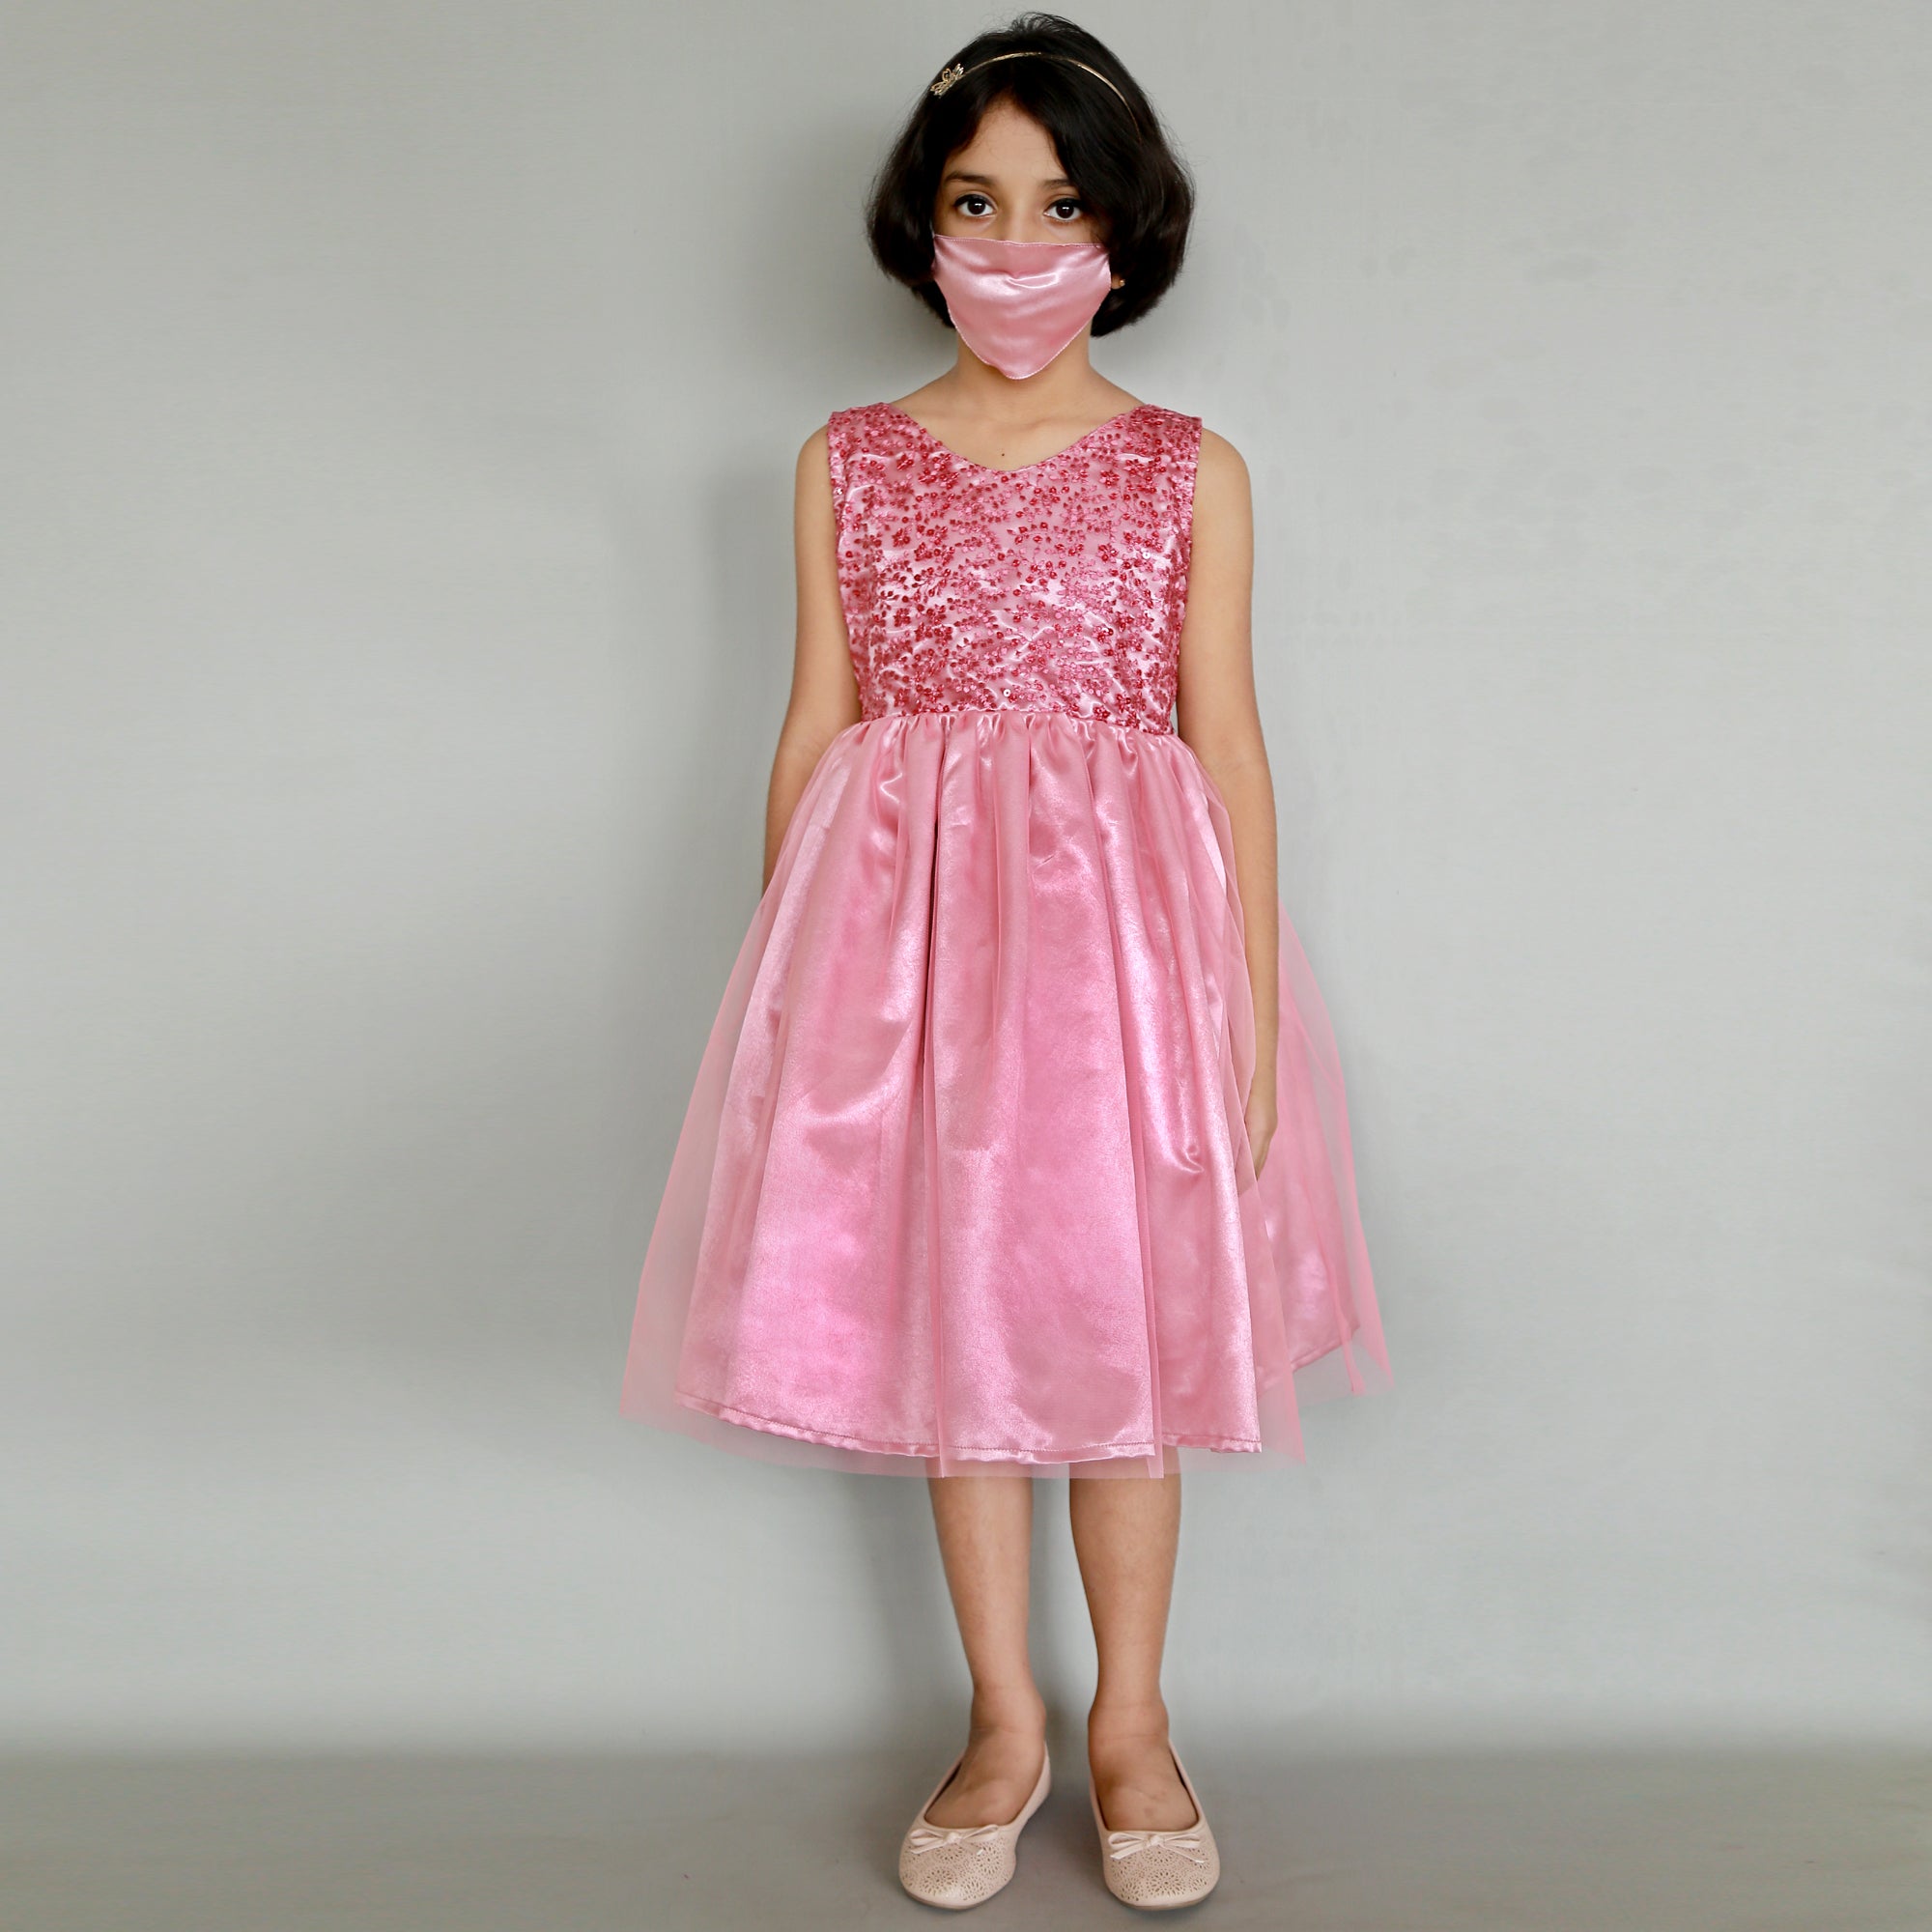 Buy Girls Dress 10 Years Online In India India, 55% OFF